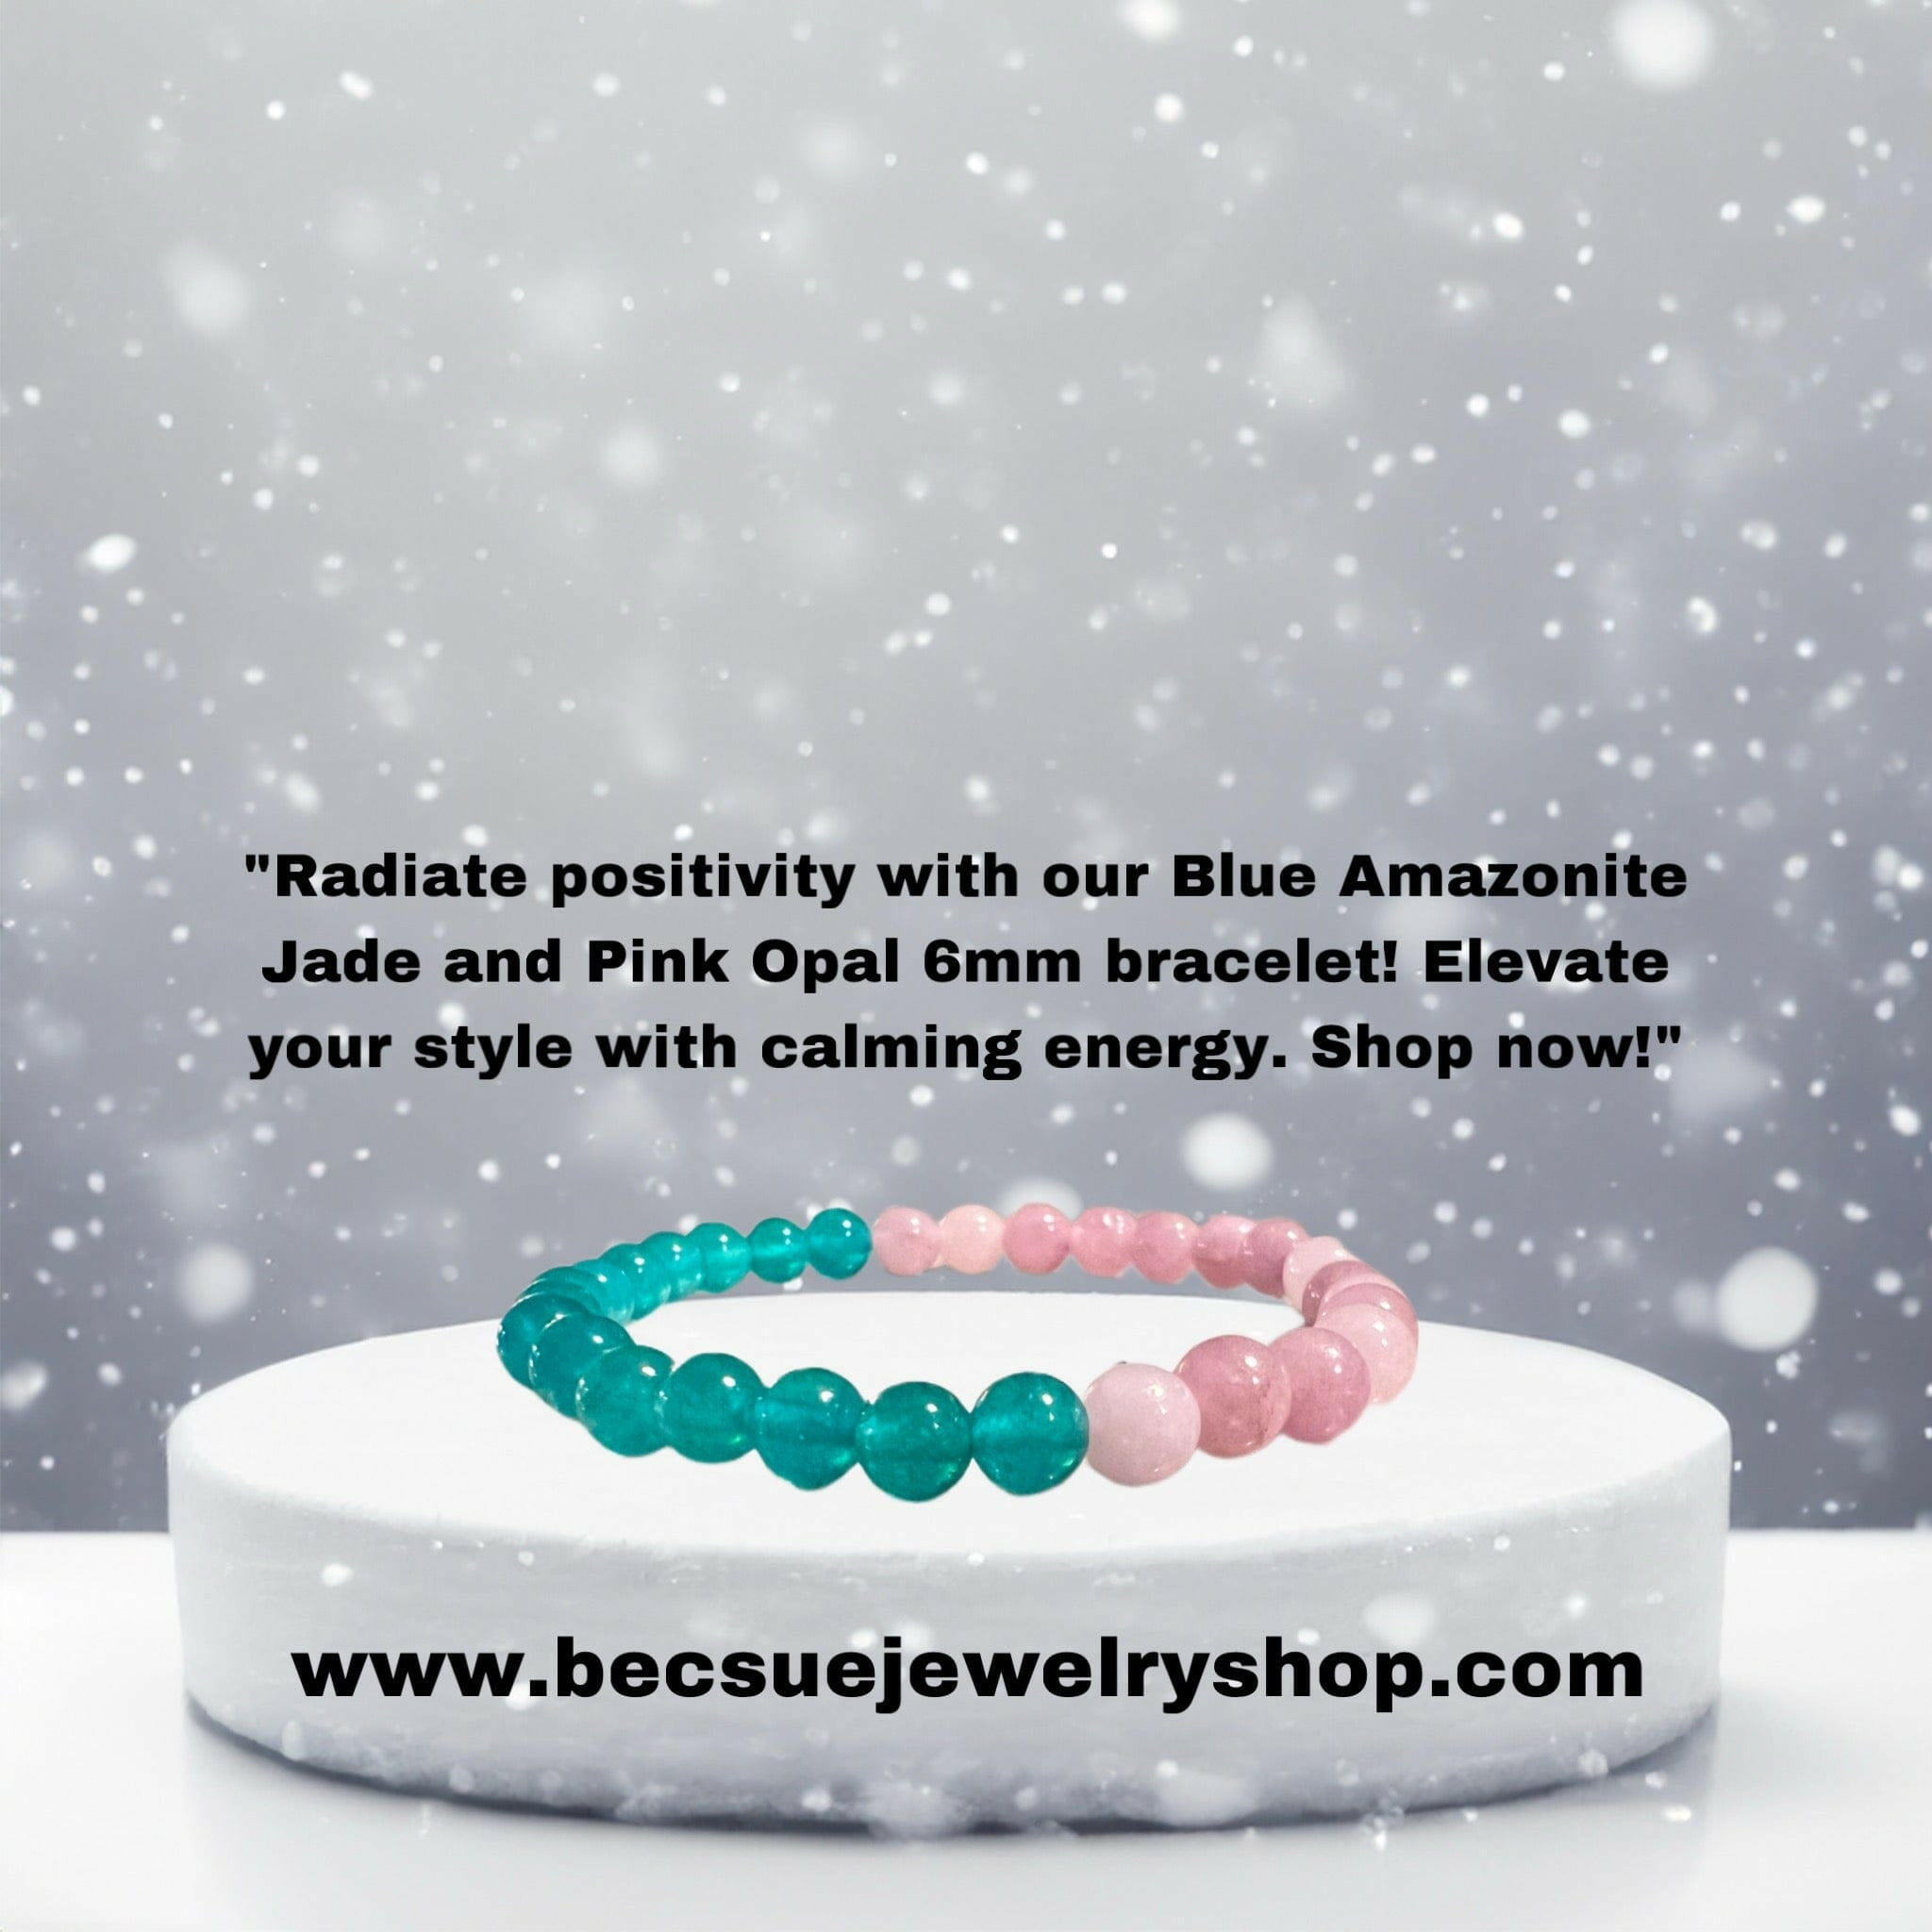 Bec Sue Jewelry Shop bracelets 6.5 / pink/blue / pink opal and blue amazonite jade "Soothing Elegance: Pink Opal and Blue Amazonite Jade 6mm Bead Stretch Bracelet for Tranquility and Harmony Tags